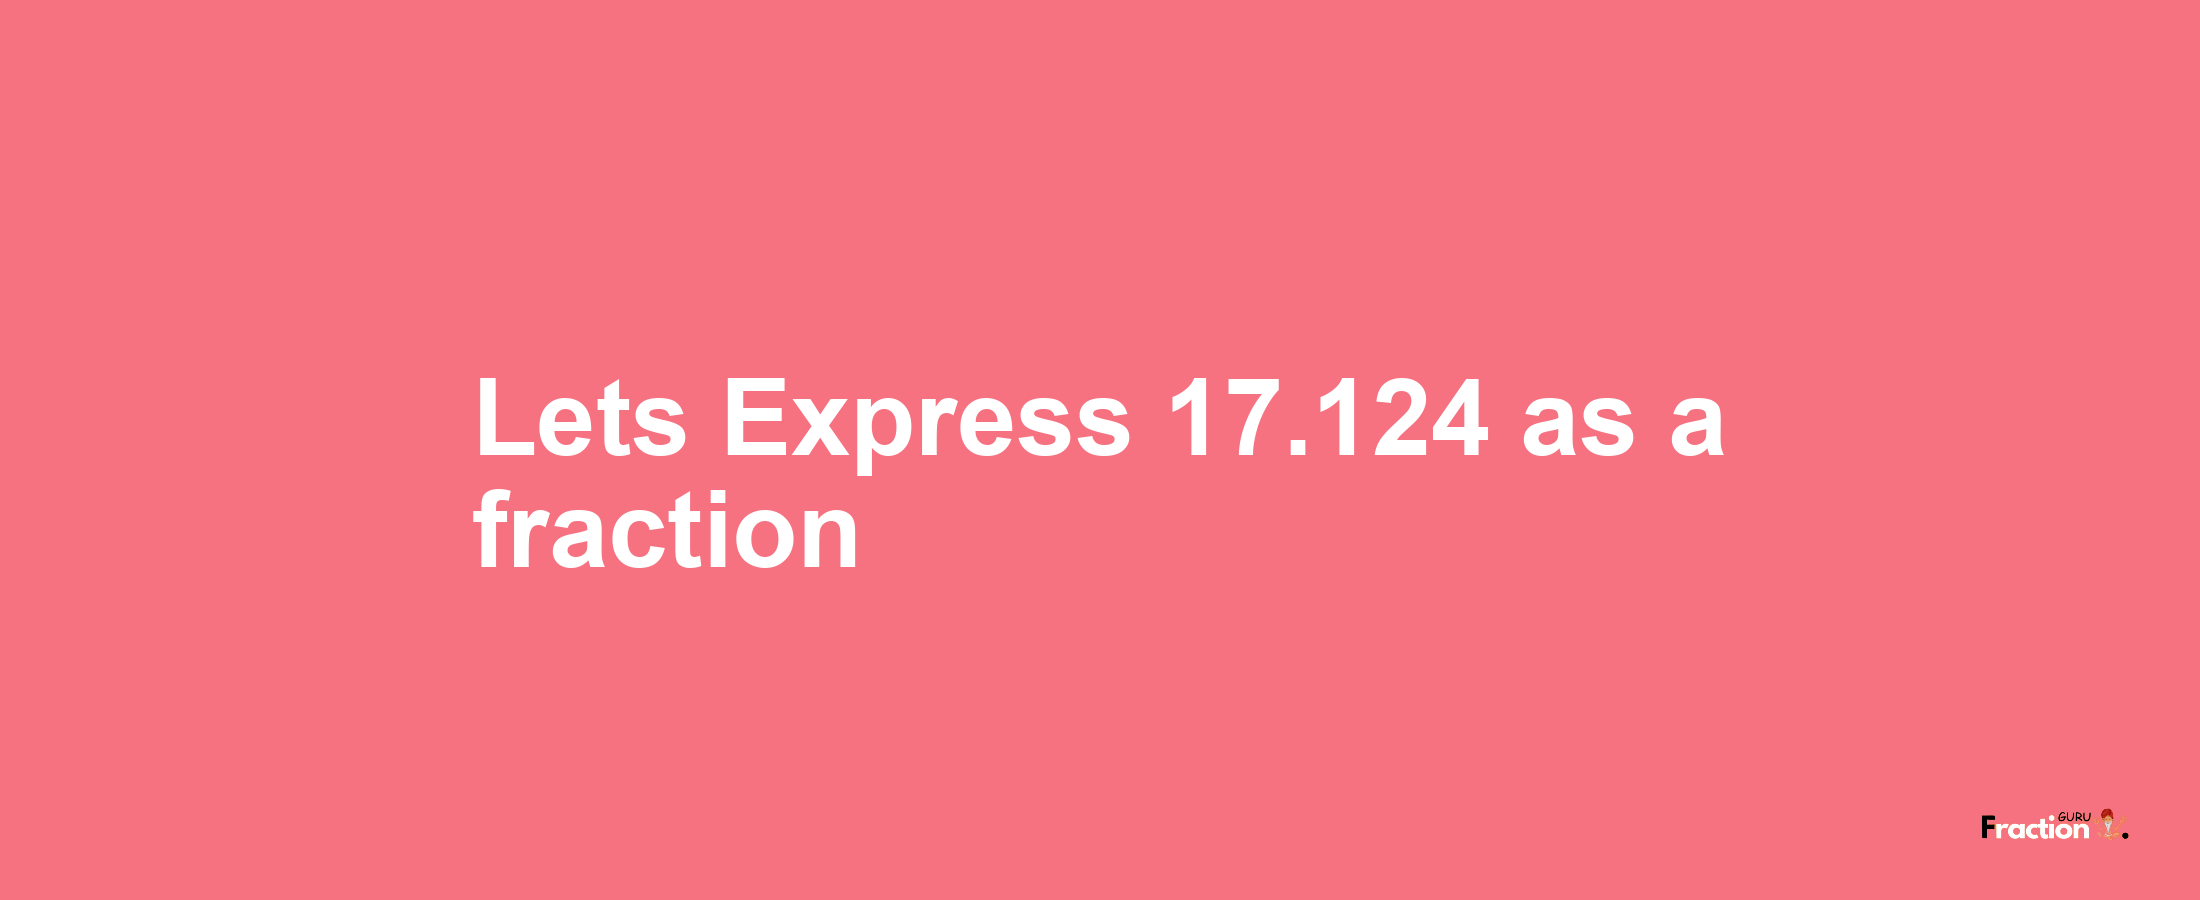 Lets Express 17.124 as afraction